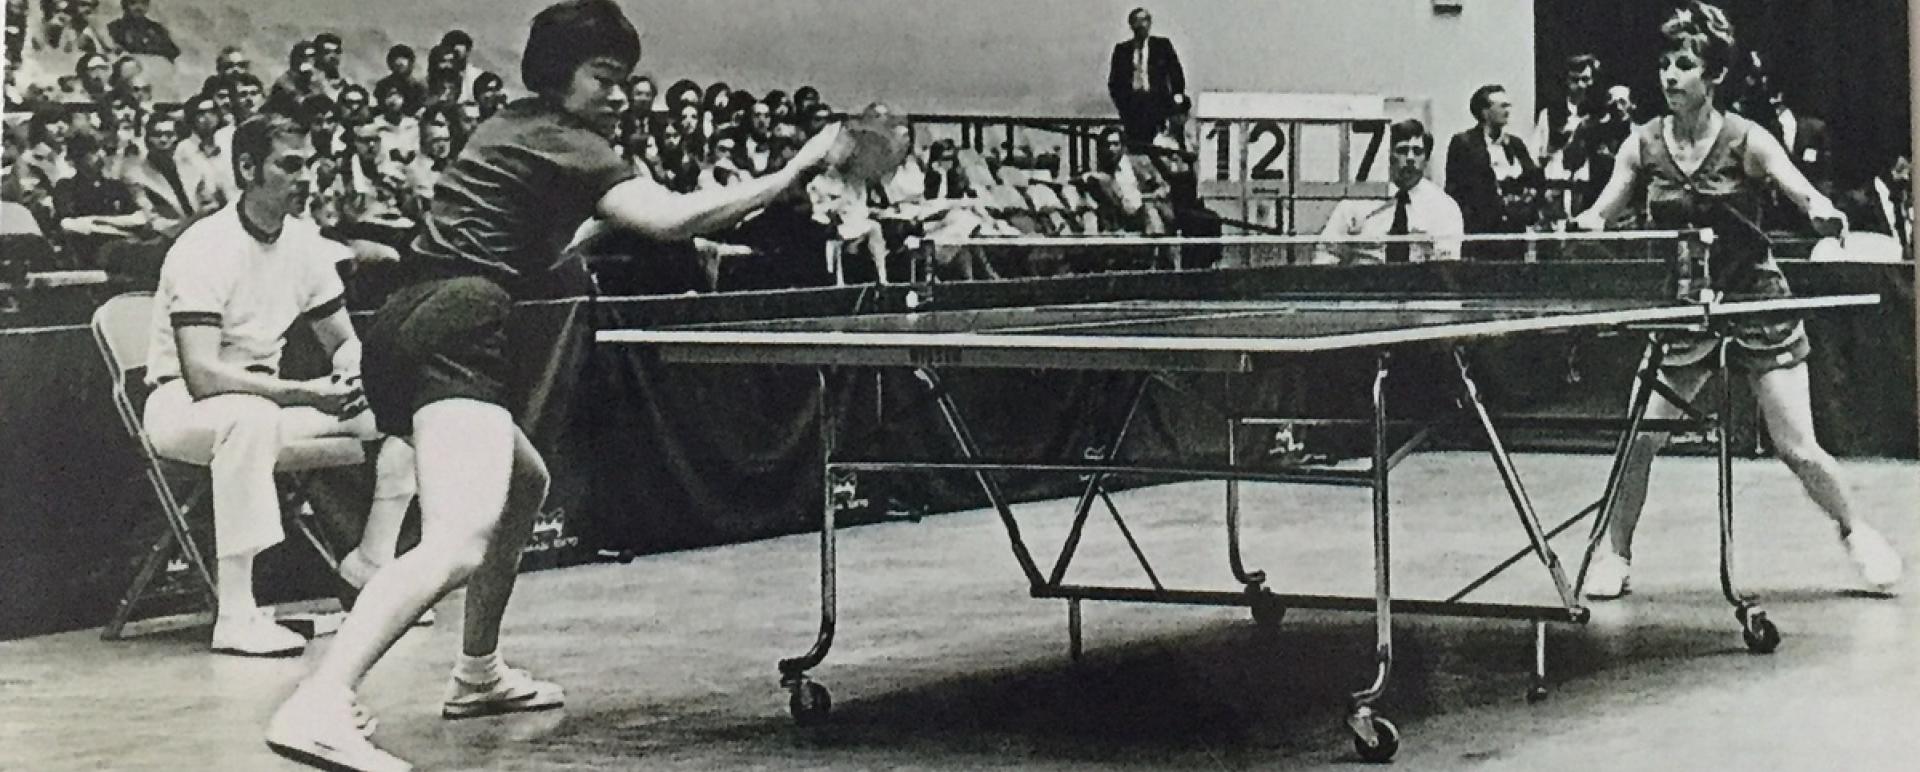 Connie Sweeris takes on a Chinese player in 1972 during the Chinese table tennis team's visit to the US. [Photo/China Daily] 